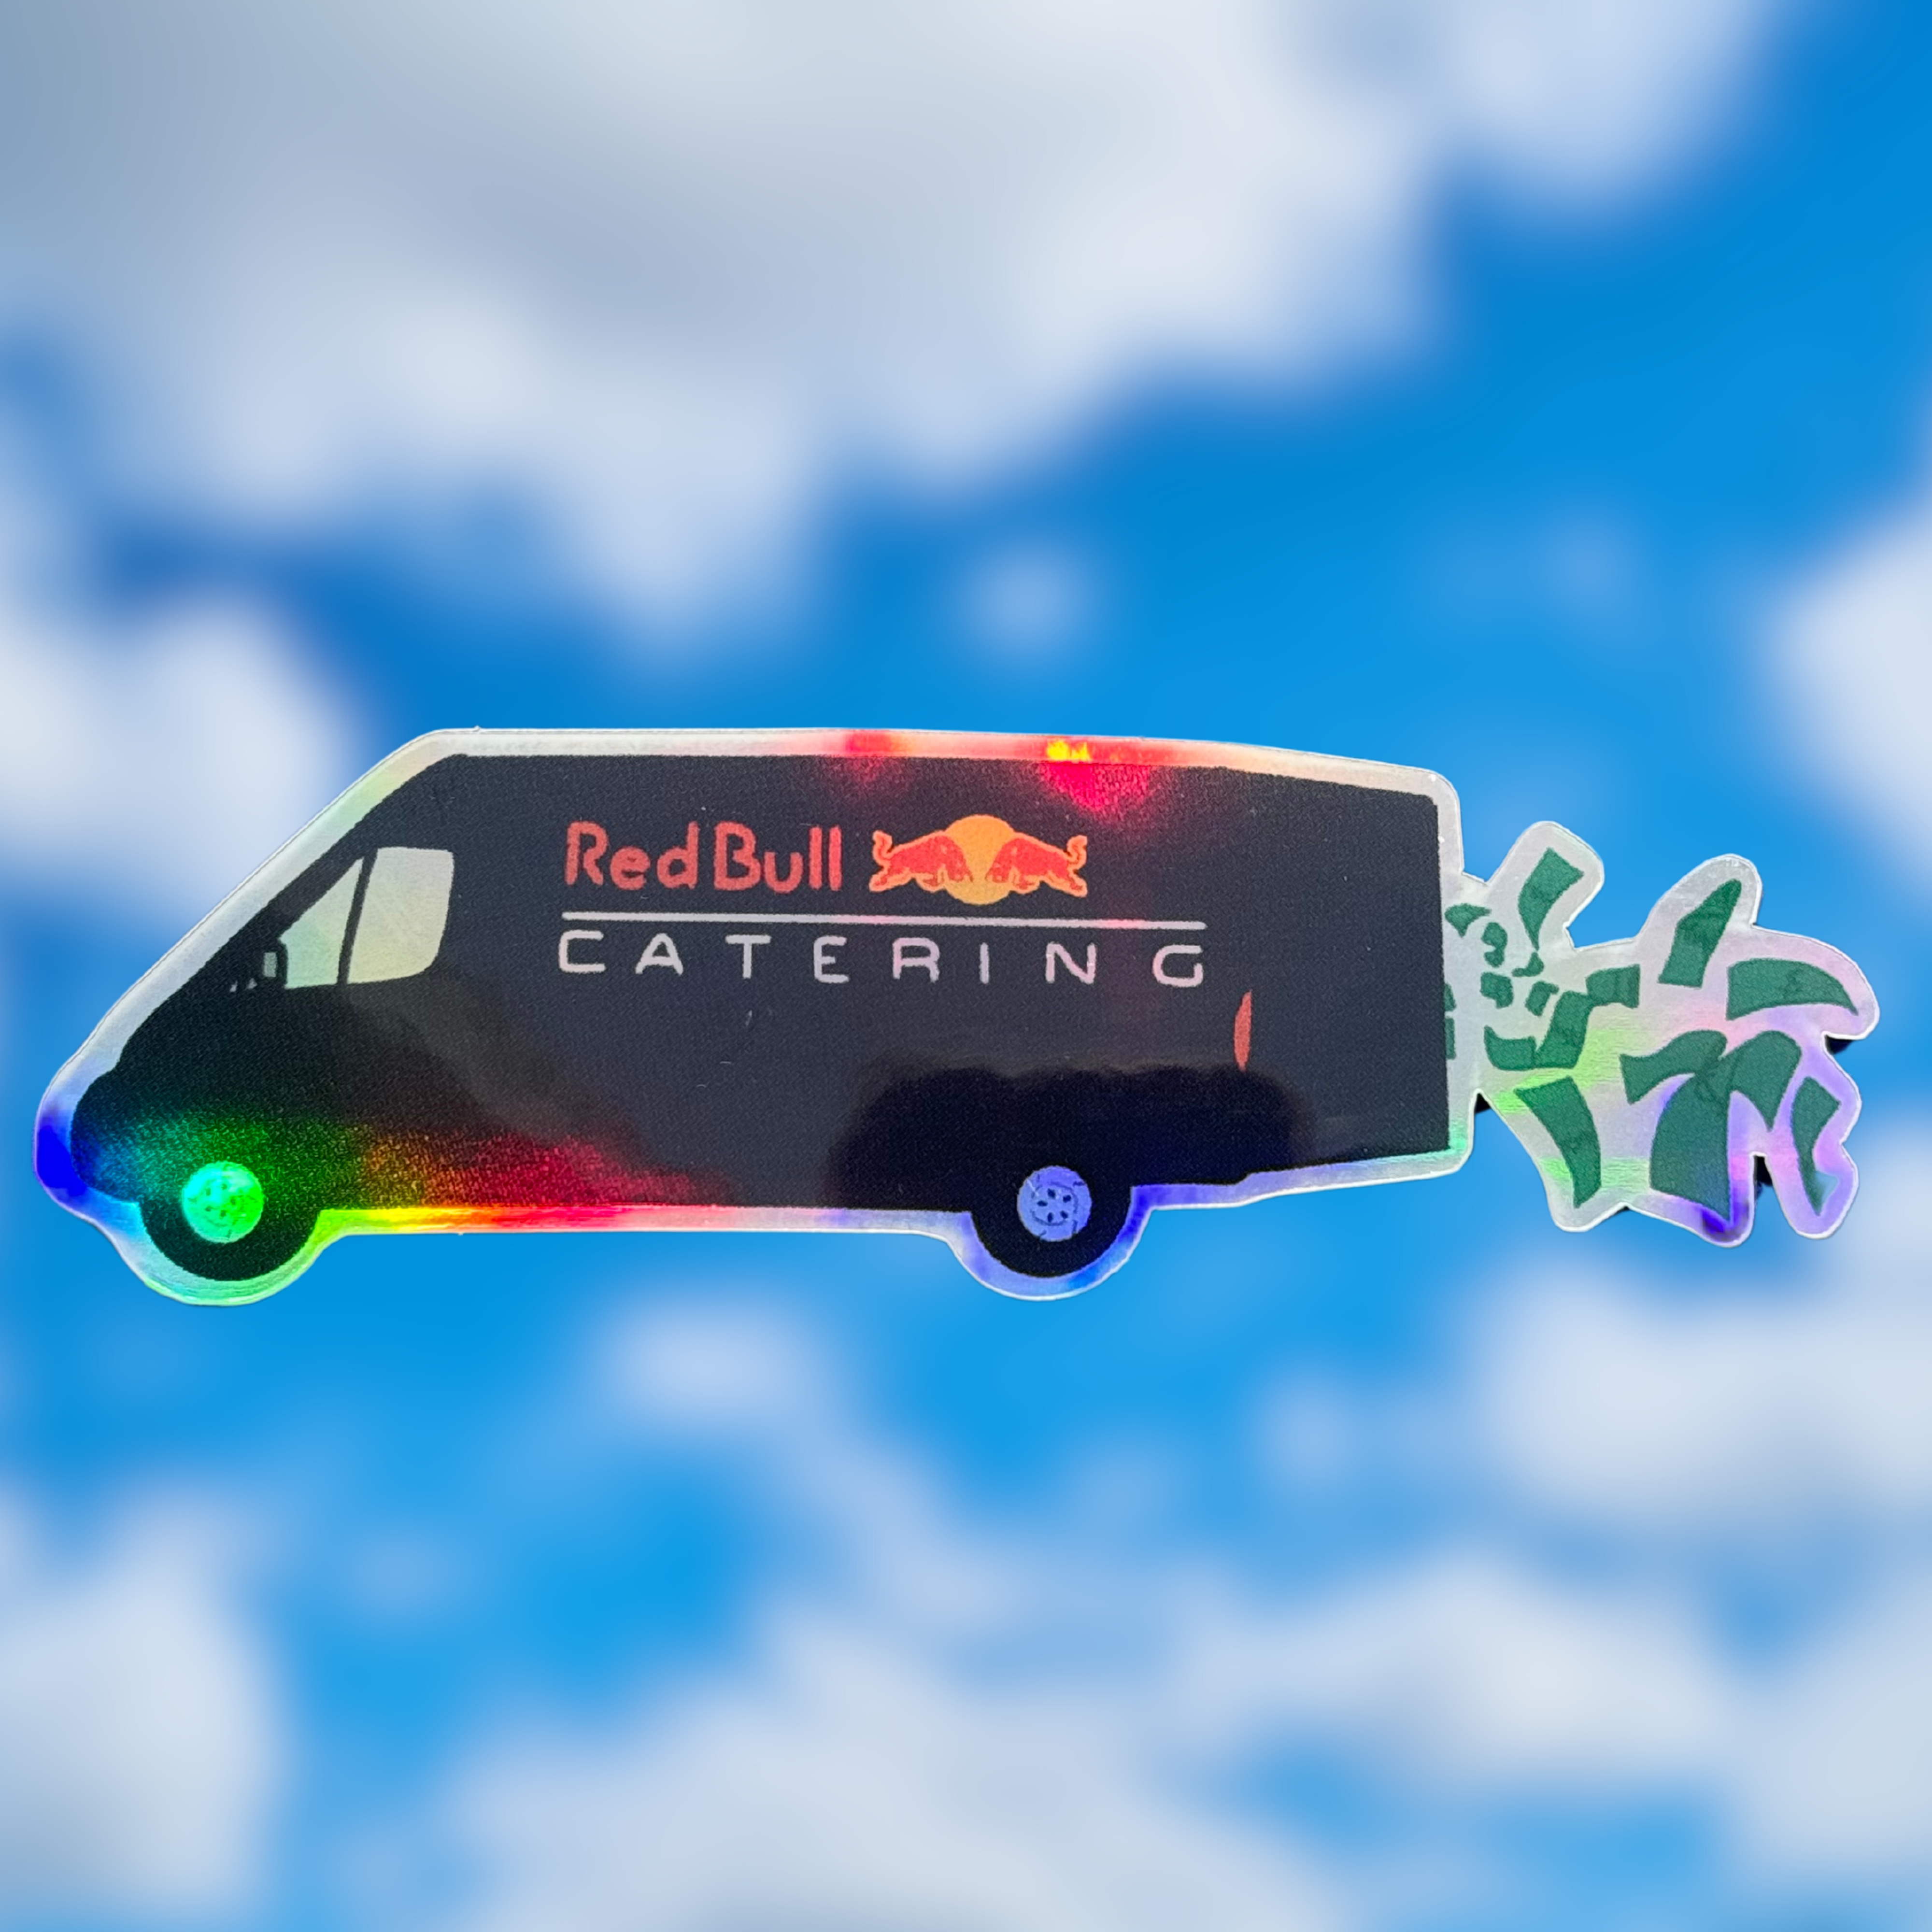 Red Bull Catering sticker